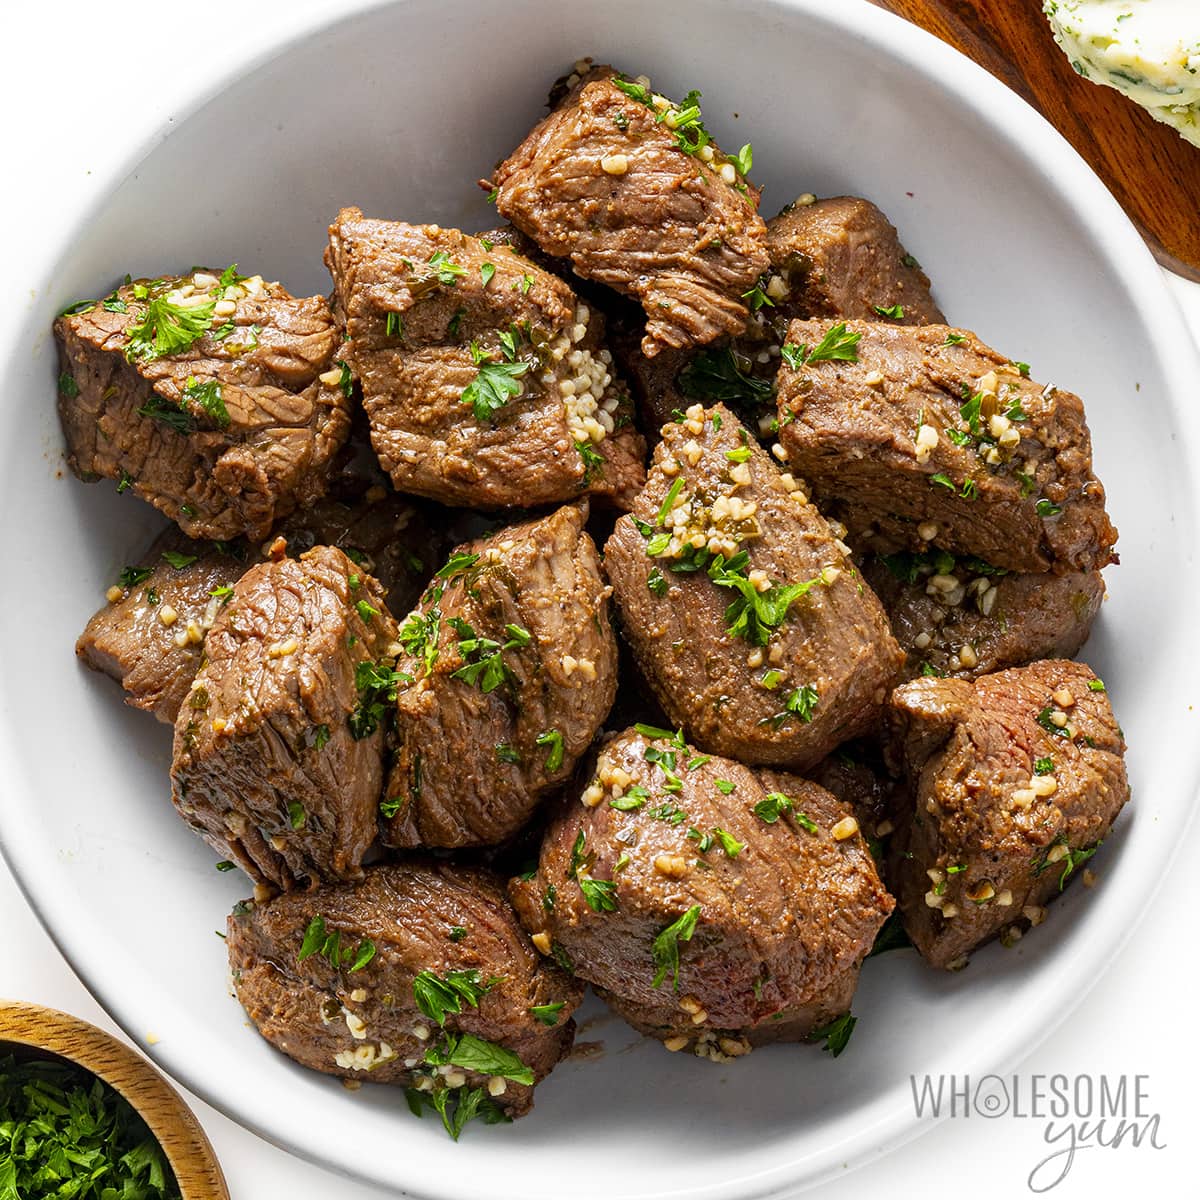 Air fryer steak bites in a bowl garnished with parsley.